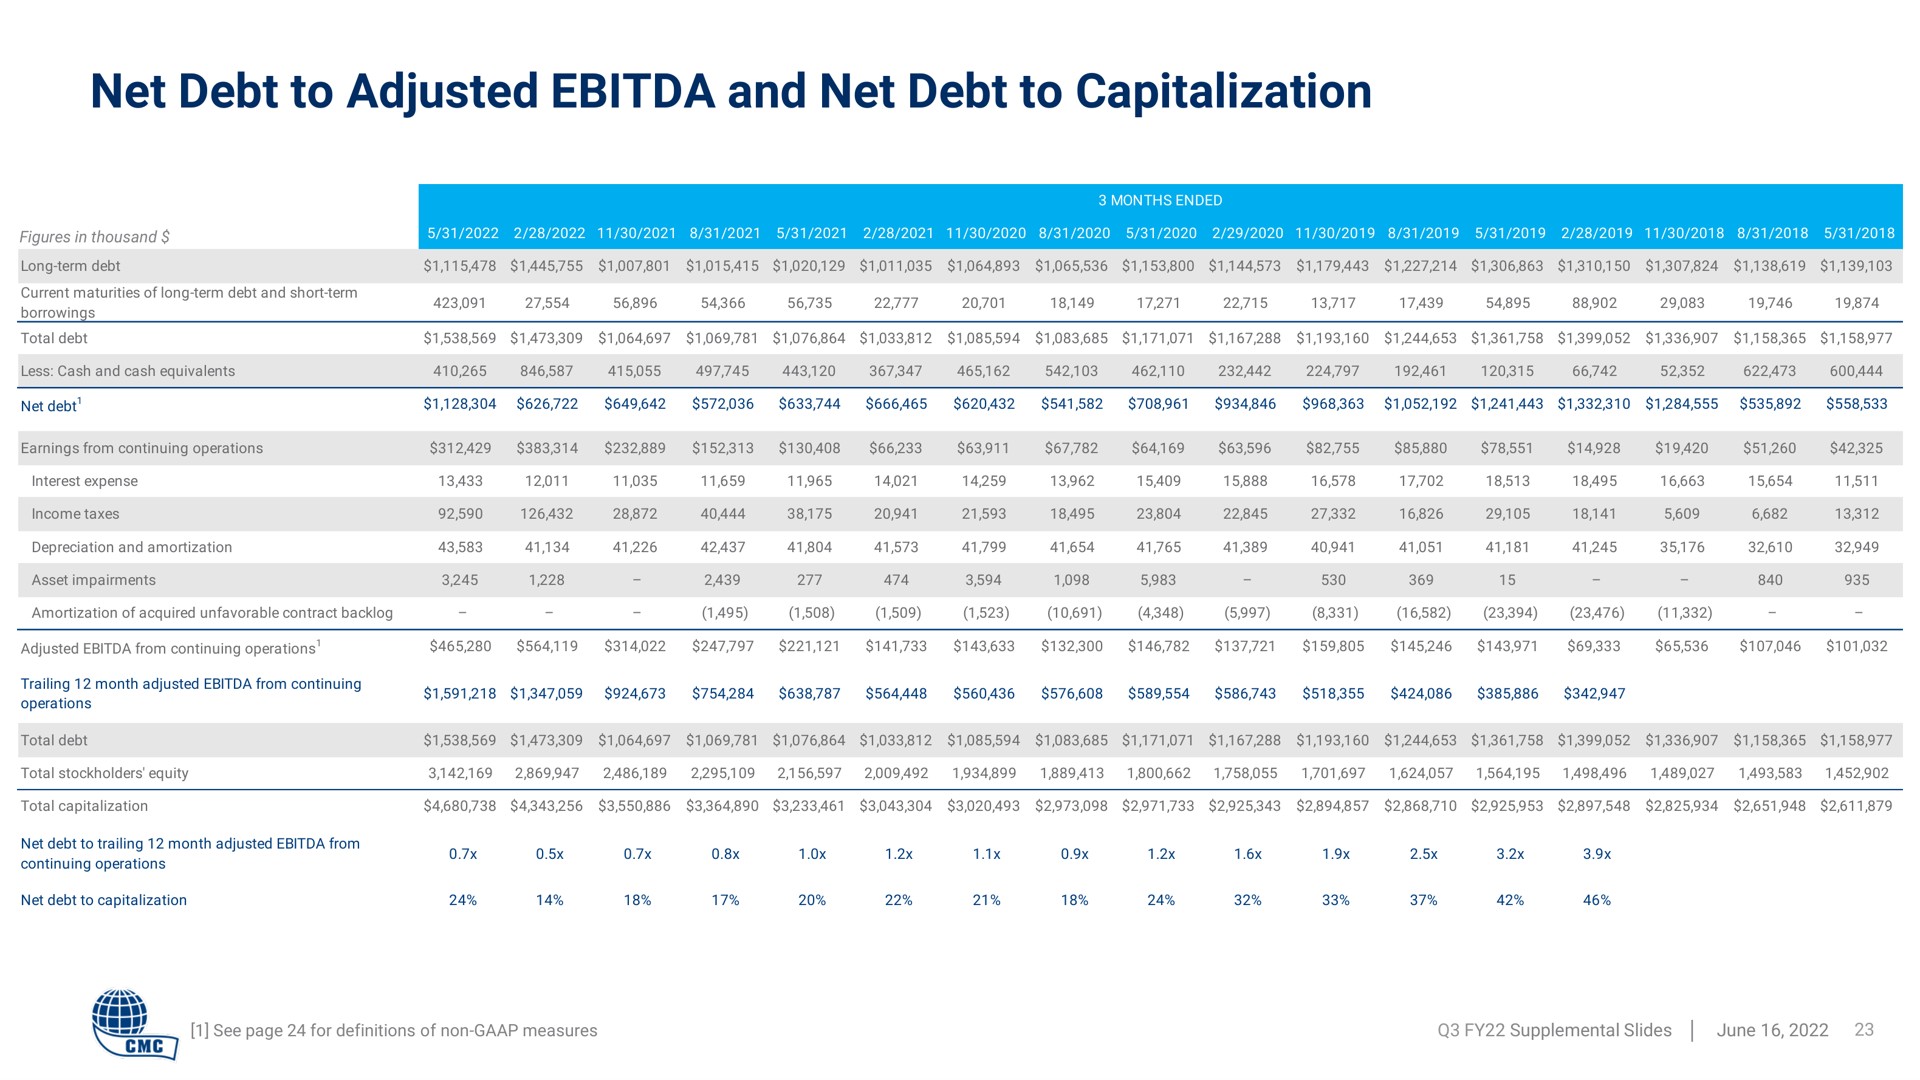 net debt to adjusted and net debt to capitalization | Commercial Metals Company